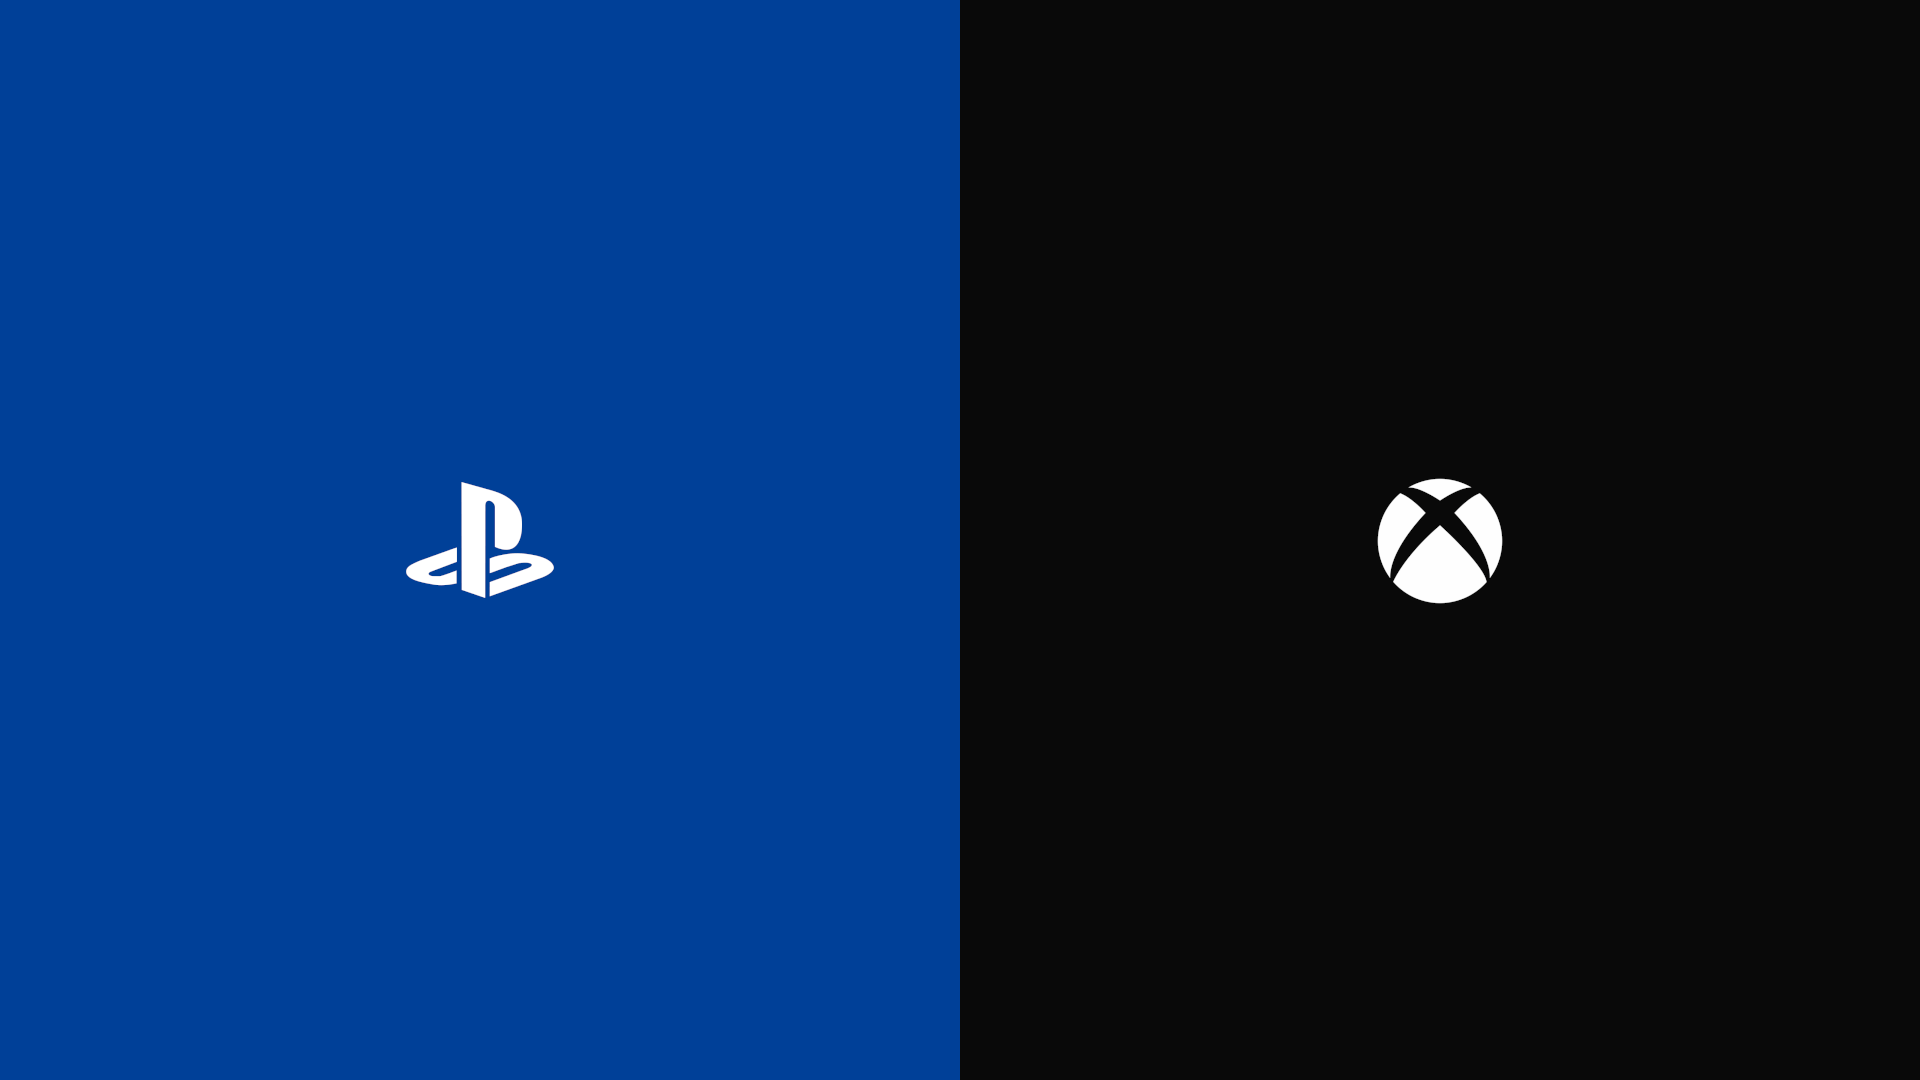 PlayStation and Xbox Wallpapers on